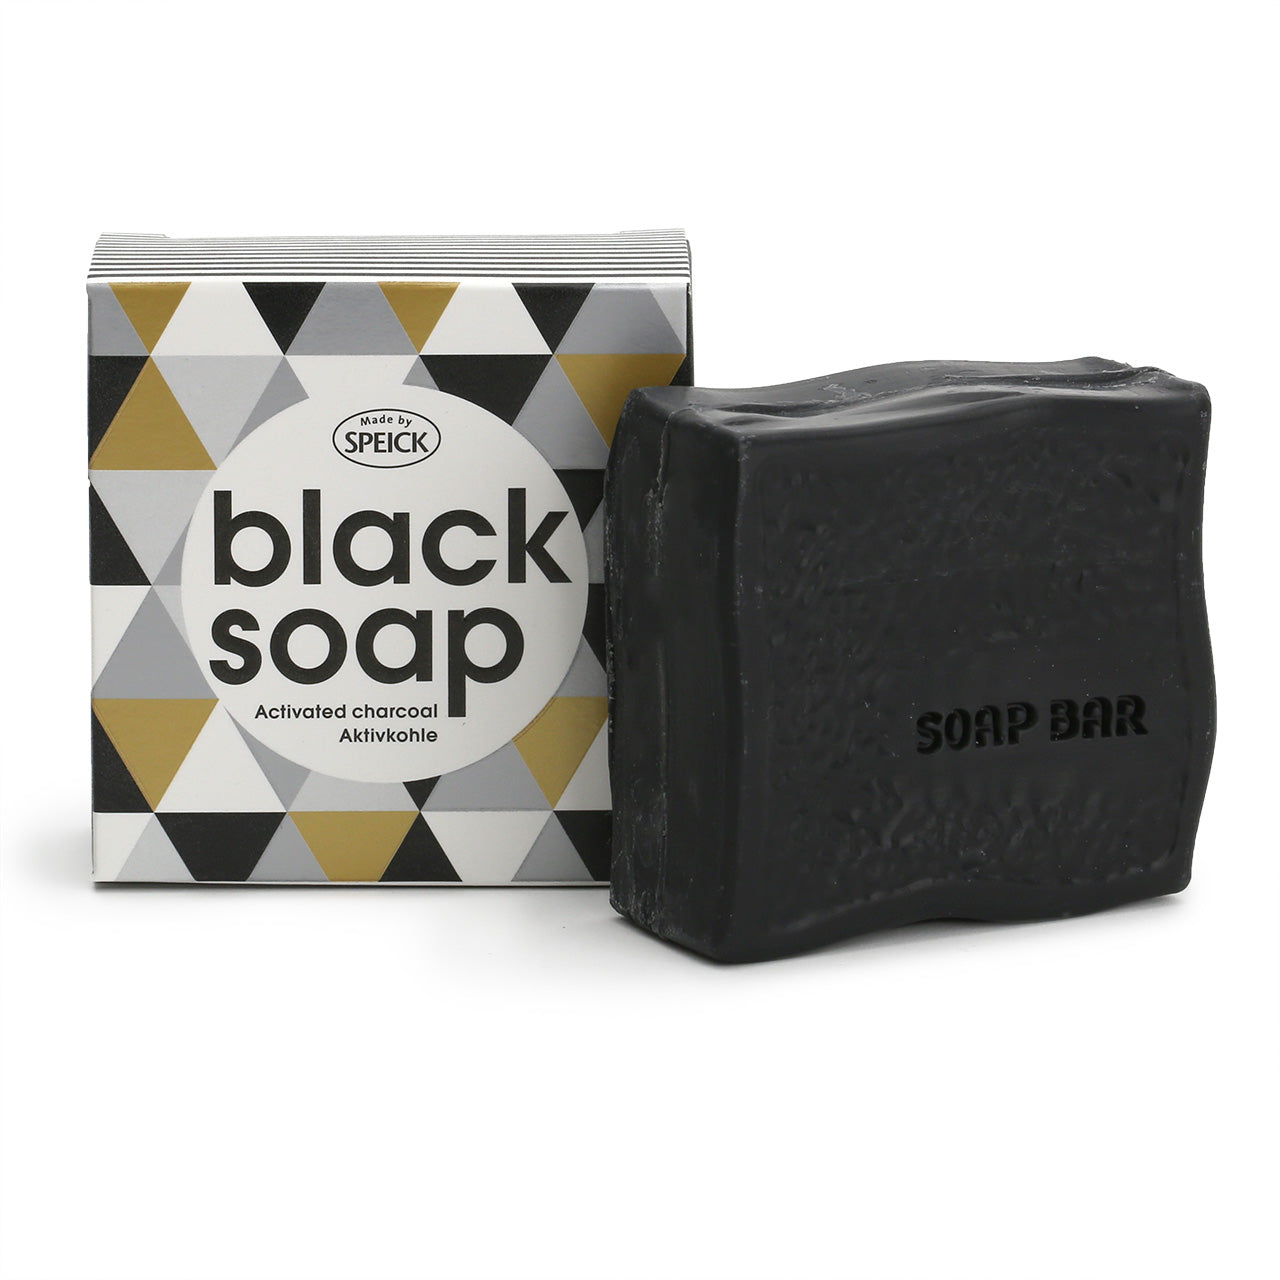 Speickactivated charcoal soap with its black white silver and gold box